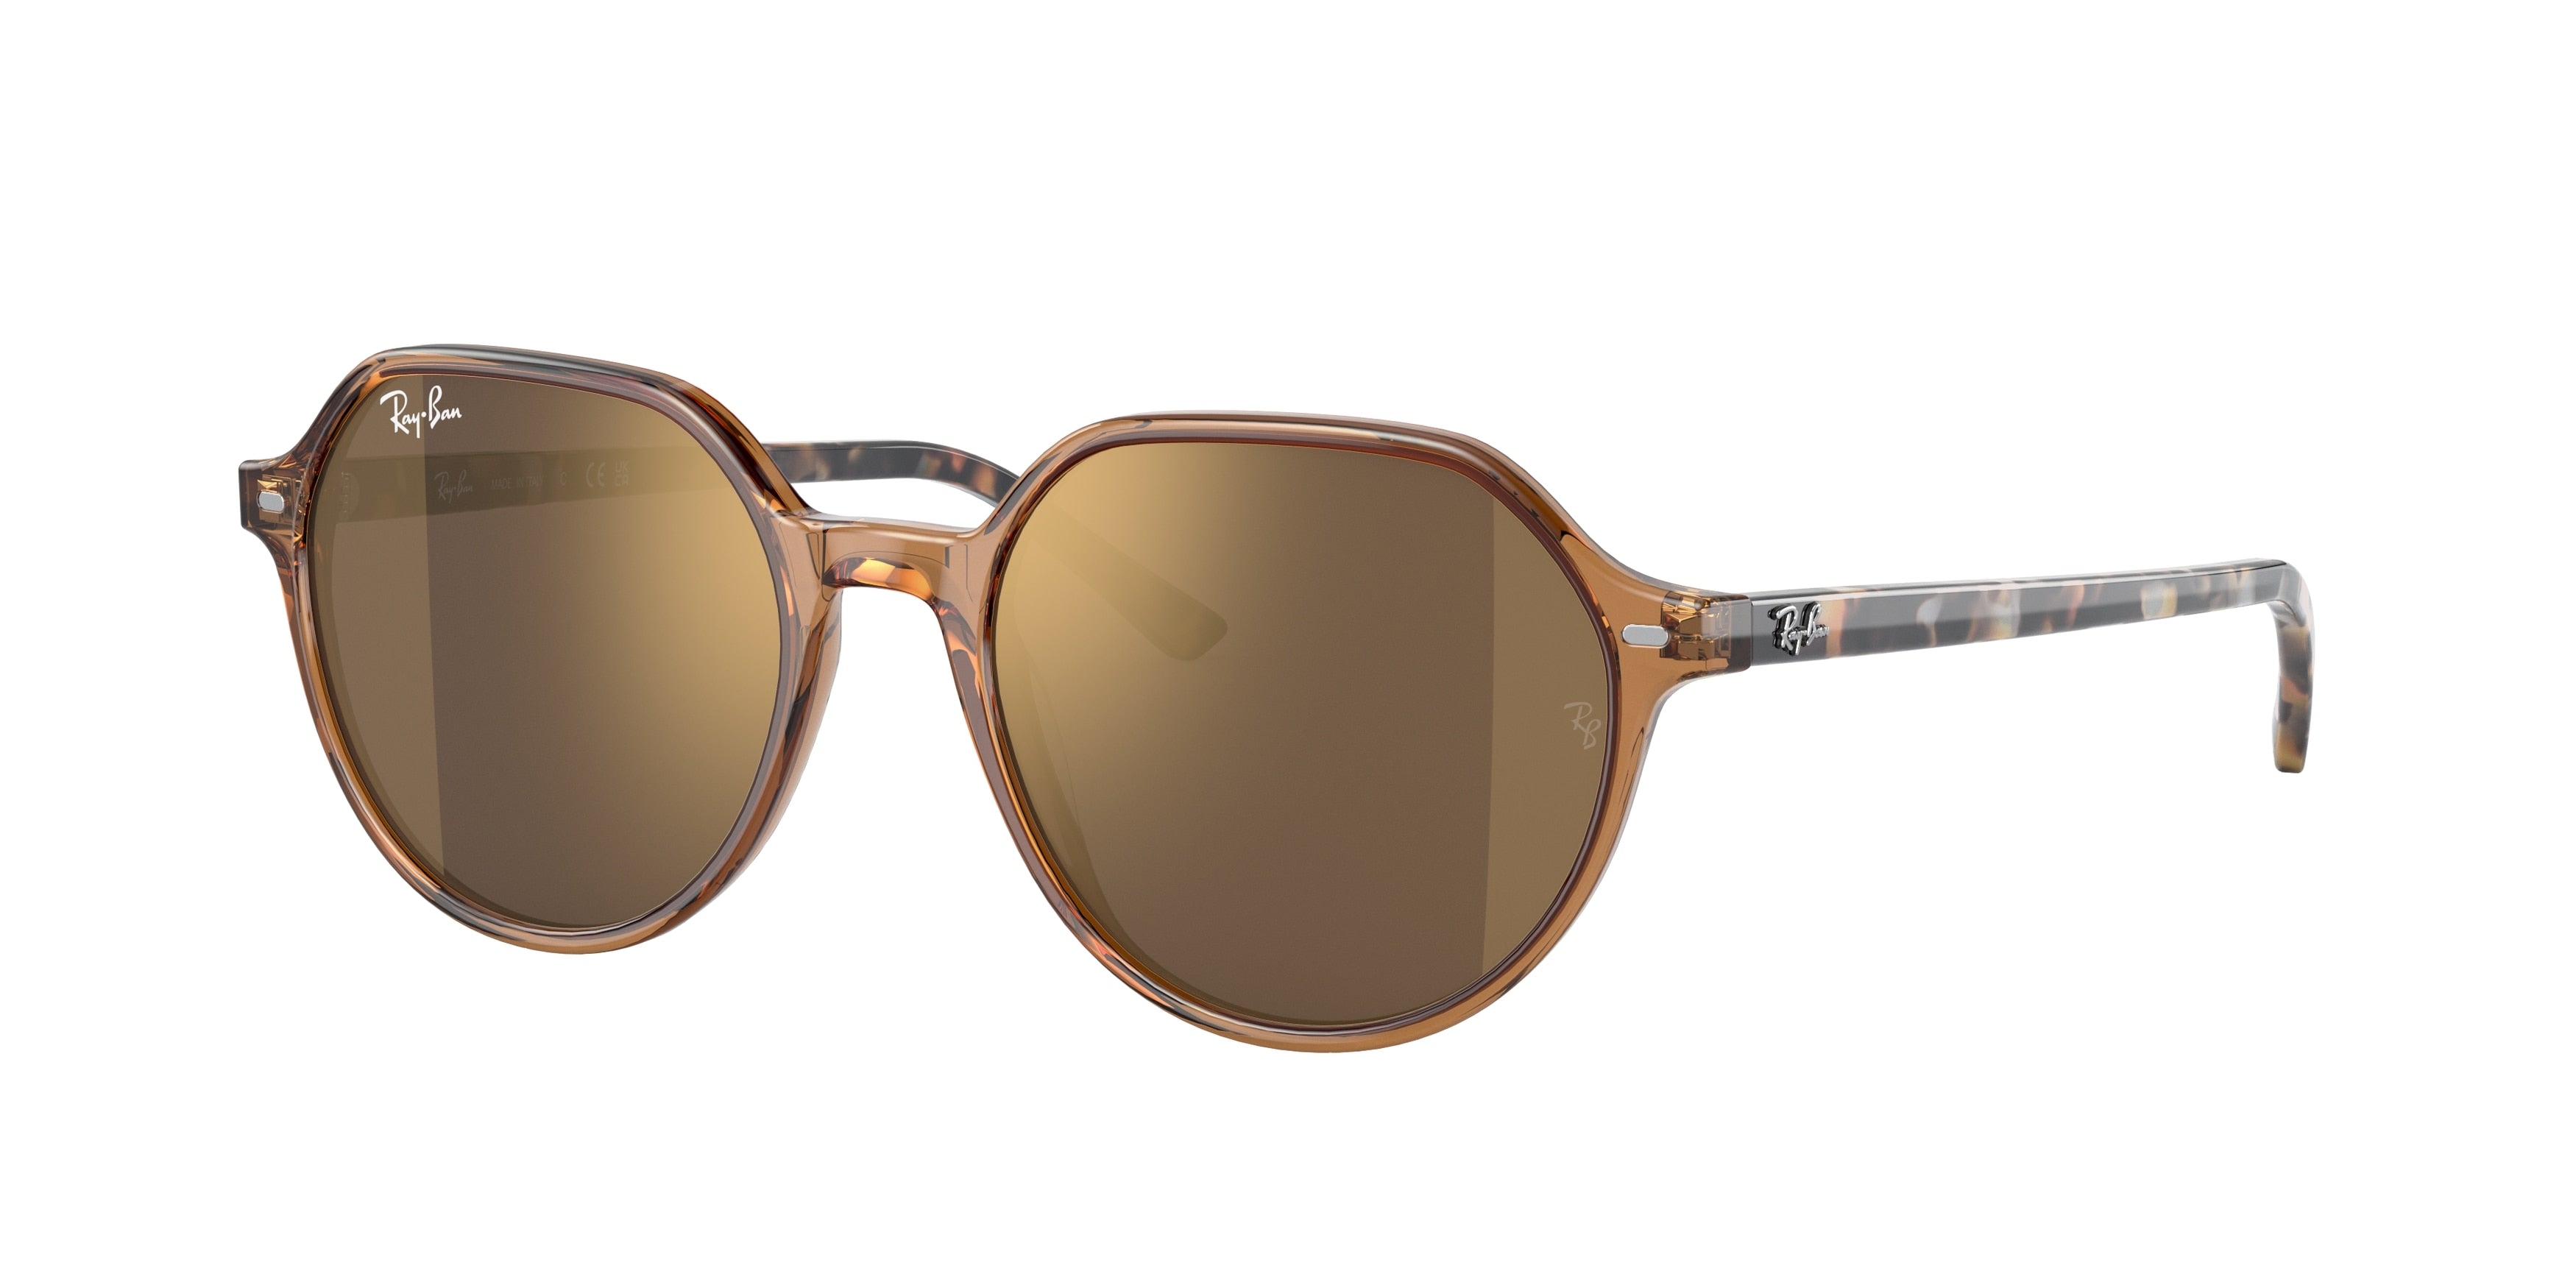 Ray-Ban THALIA RB2195 Square Sunglasses  663693-Transparent Brown 55-145-18 - Color Map Brown